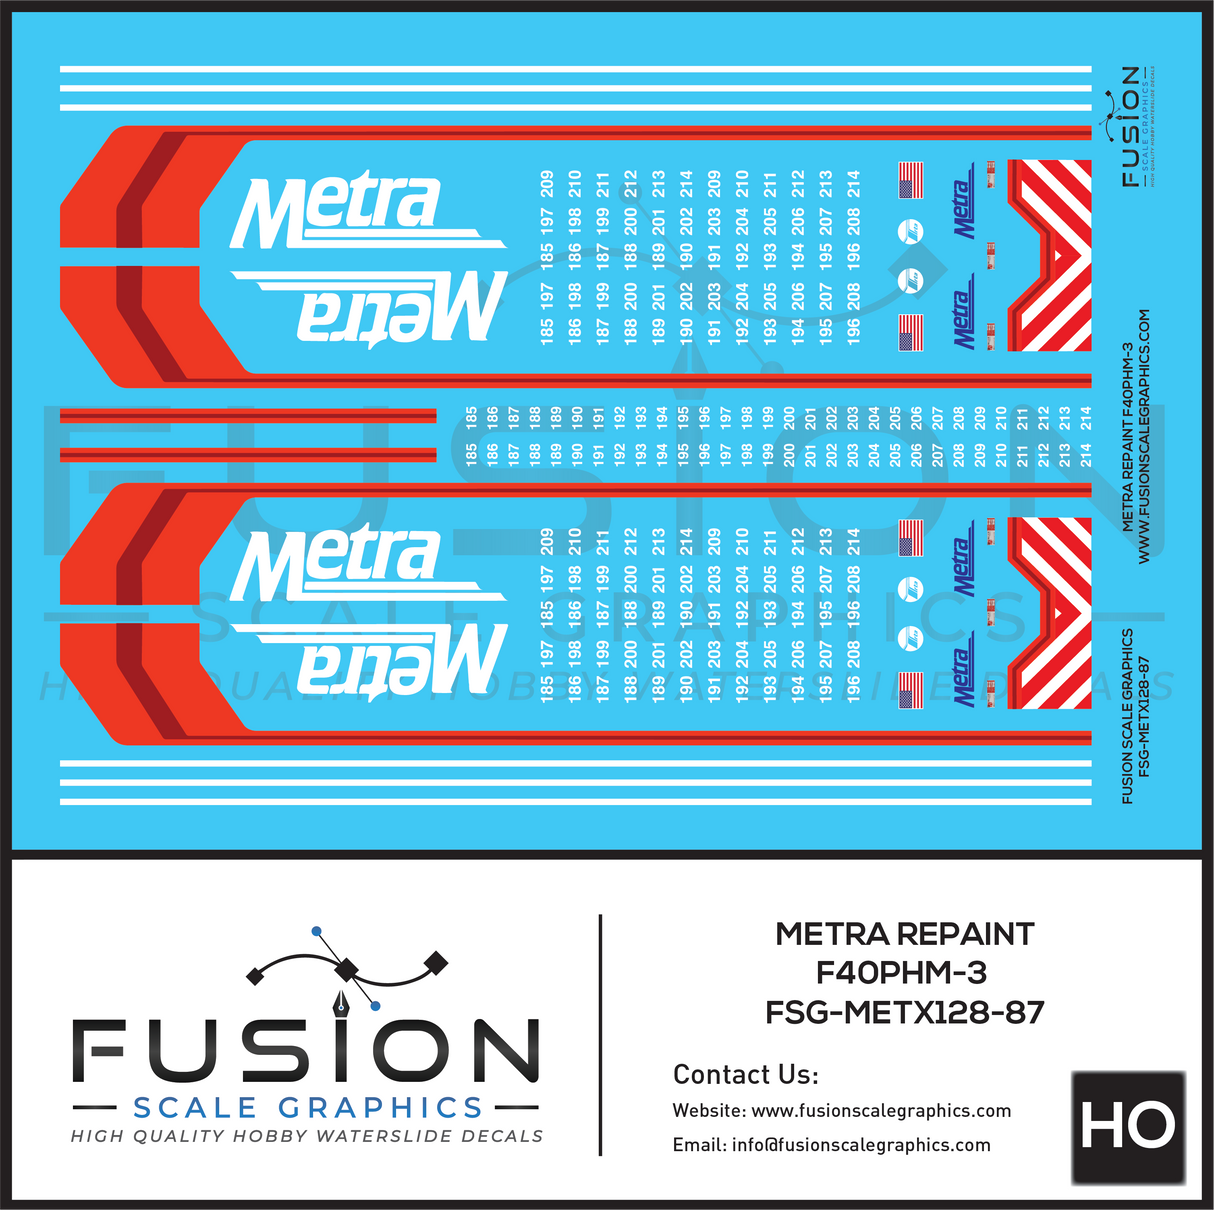 Metra HO Scale Repaint F40PHM-3 Locomotives Decal Set